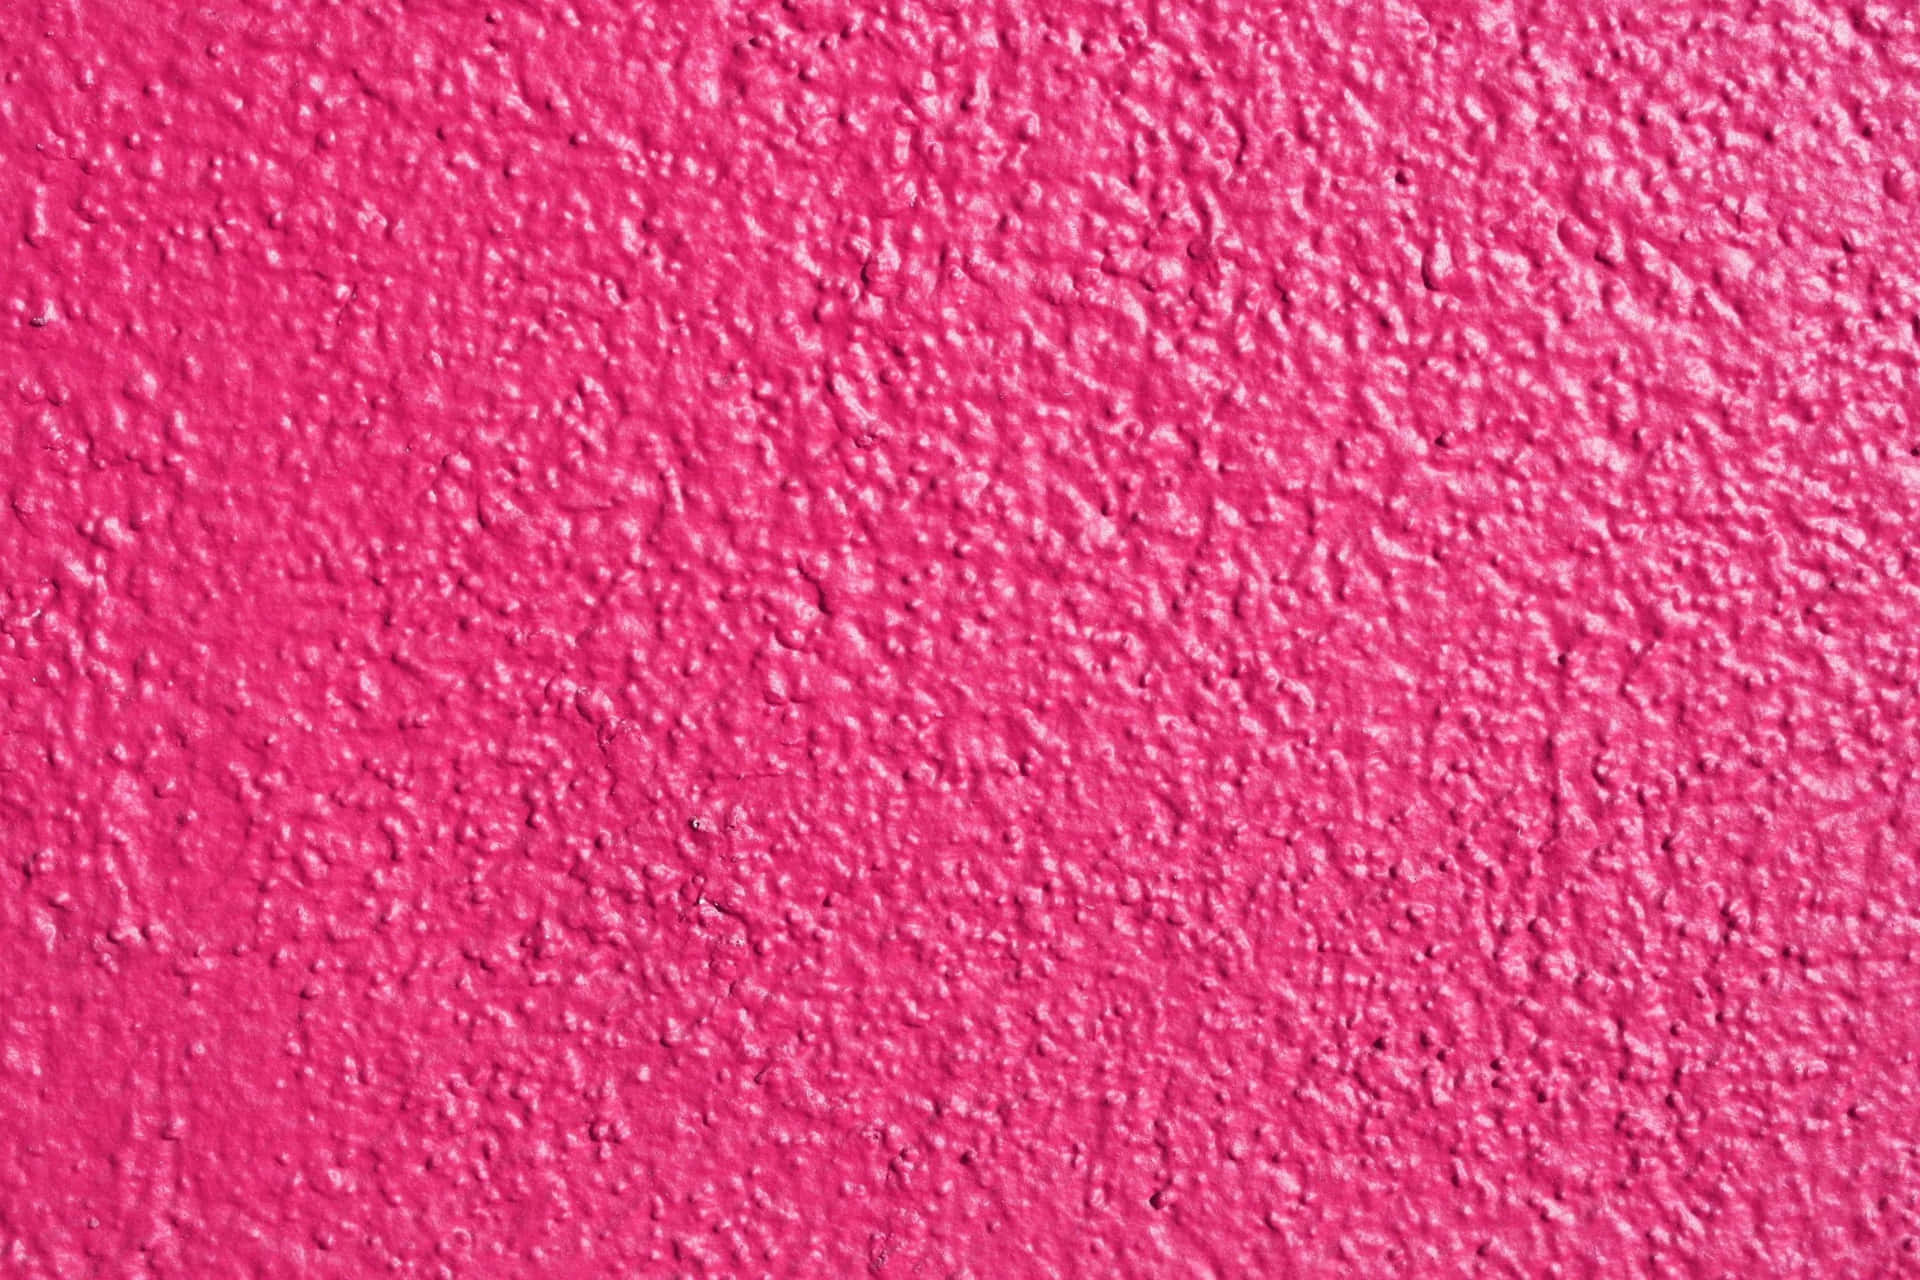 Add a splash of color to your life with this bright pink, textured background.